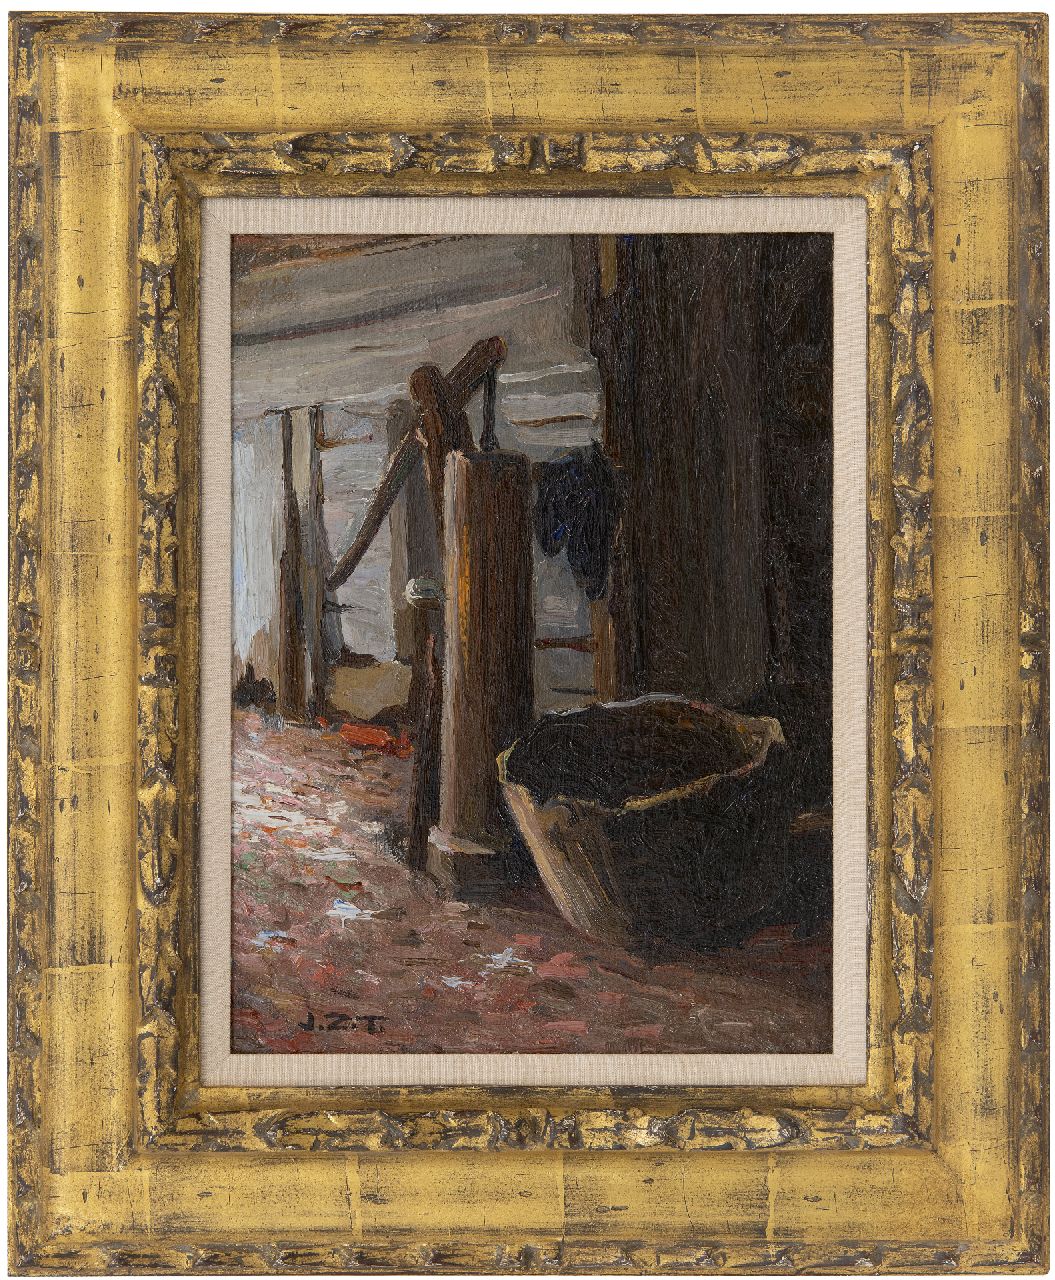 Zoetelief Tromp J.  | Johannes 'Jan' Zoetelief Tromp | Paintings offered for sale | Water pump, oil on canvas laid down on cardboard 31.0 x 23.1 cm, signed l.l. with initials